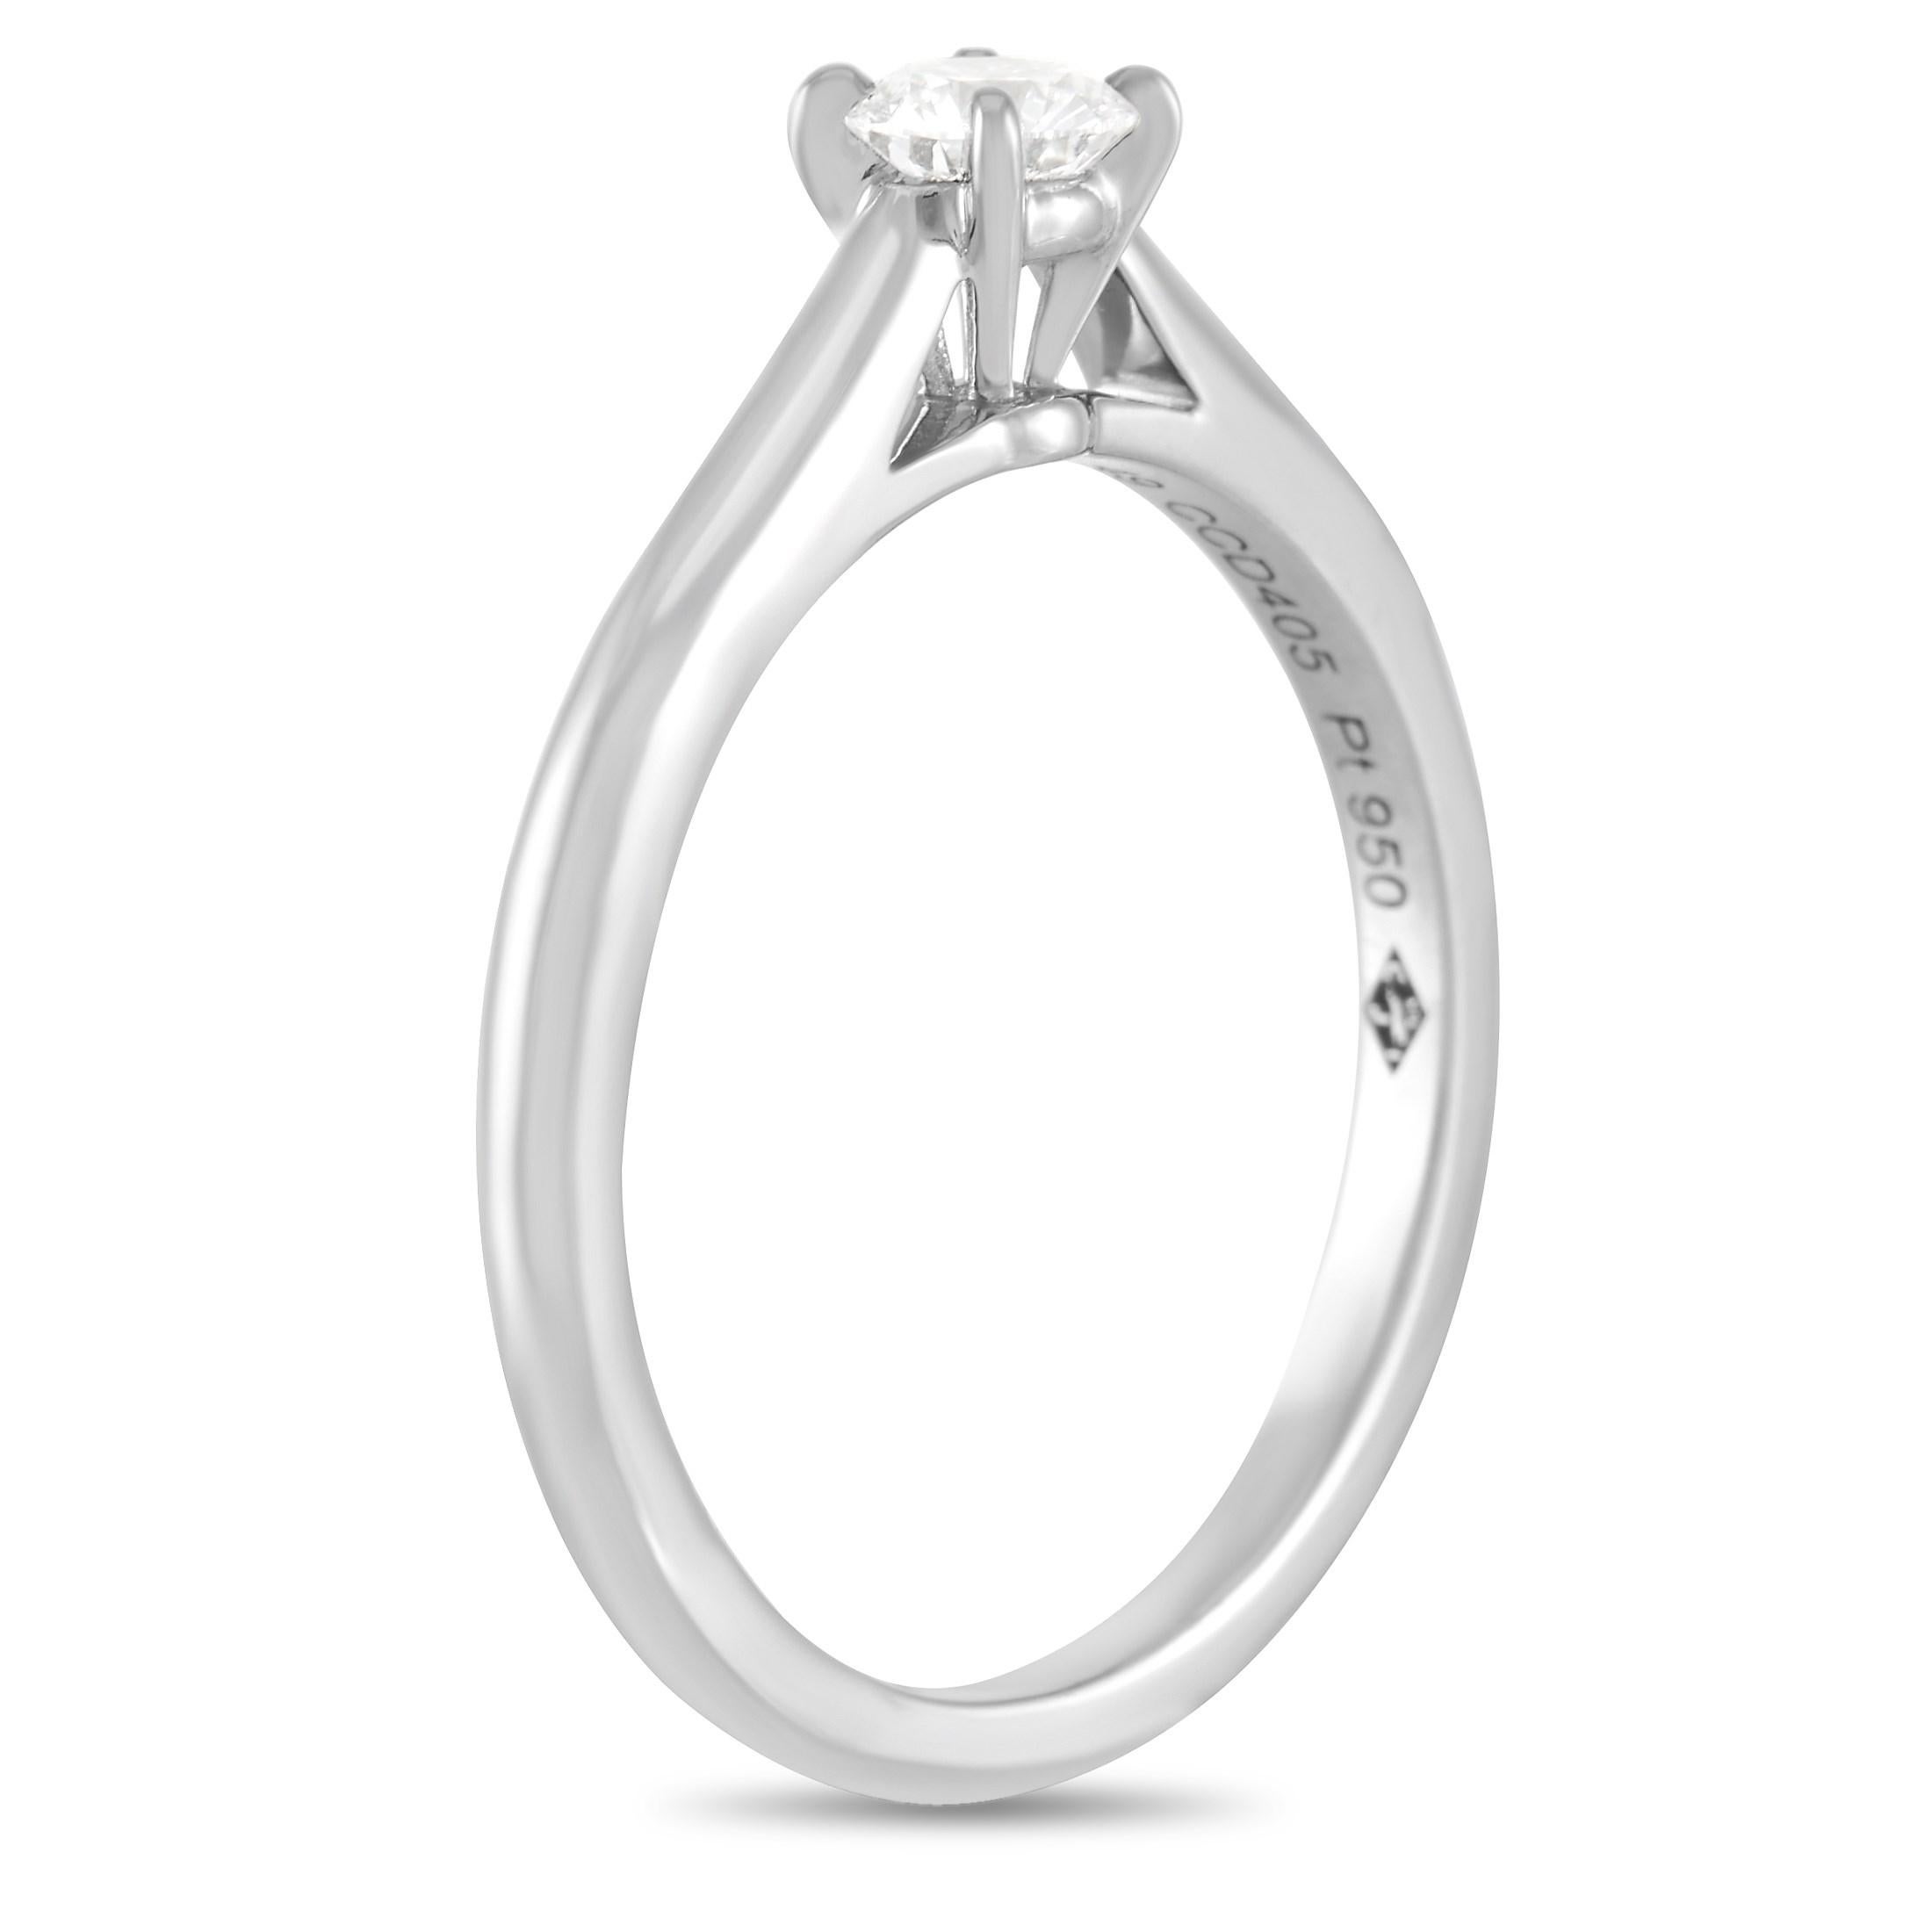 This Cartier Platinum 0.29 ct Diamond Solitaire Ring is perfect for the one you love. The band is crafted from platinum and set with a solitary round cut 0.29 carat diamond that is D color, VS1 clarity. The ring has a band thickness of 1 mm, a top